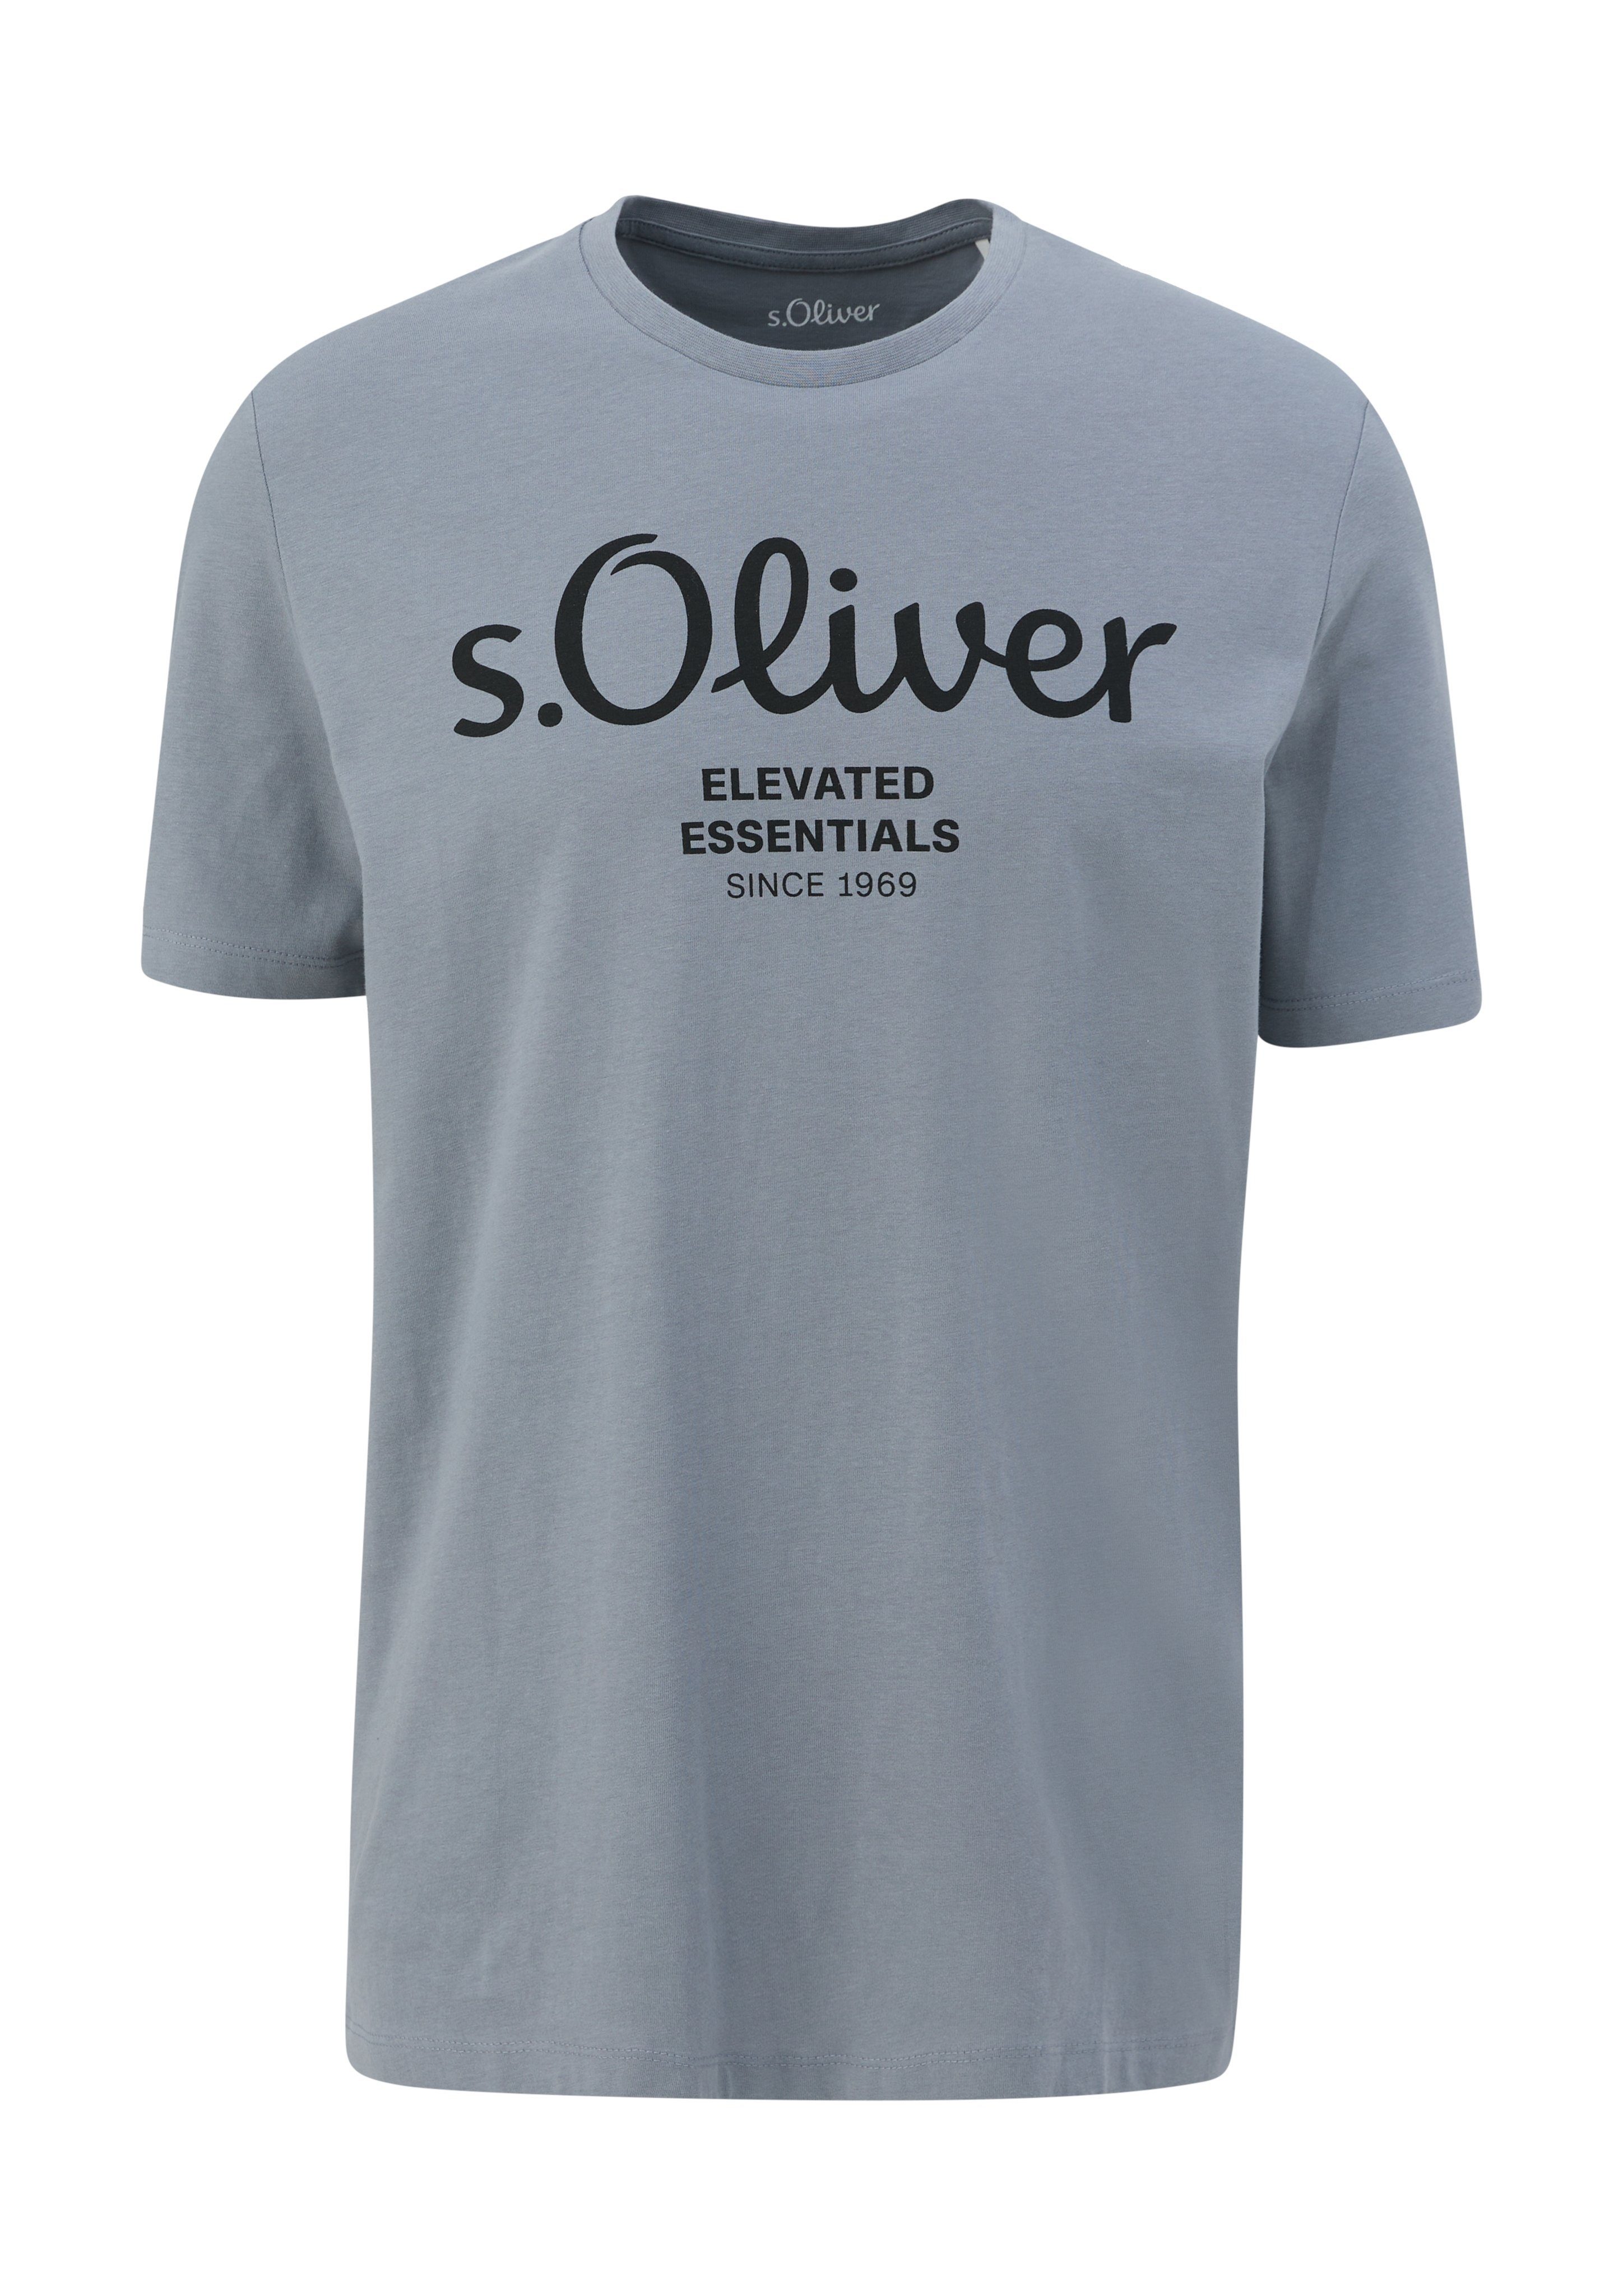 s.Oliver T-Shirt im sportiven mid grey Look